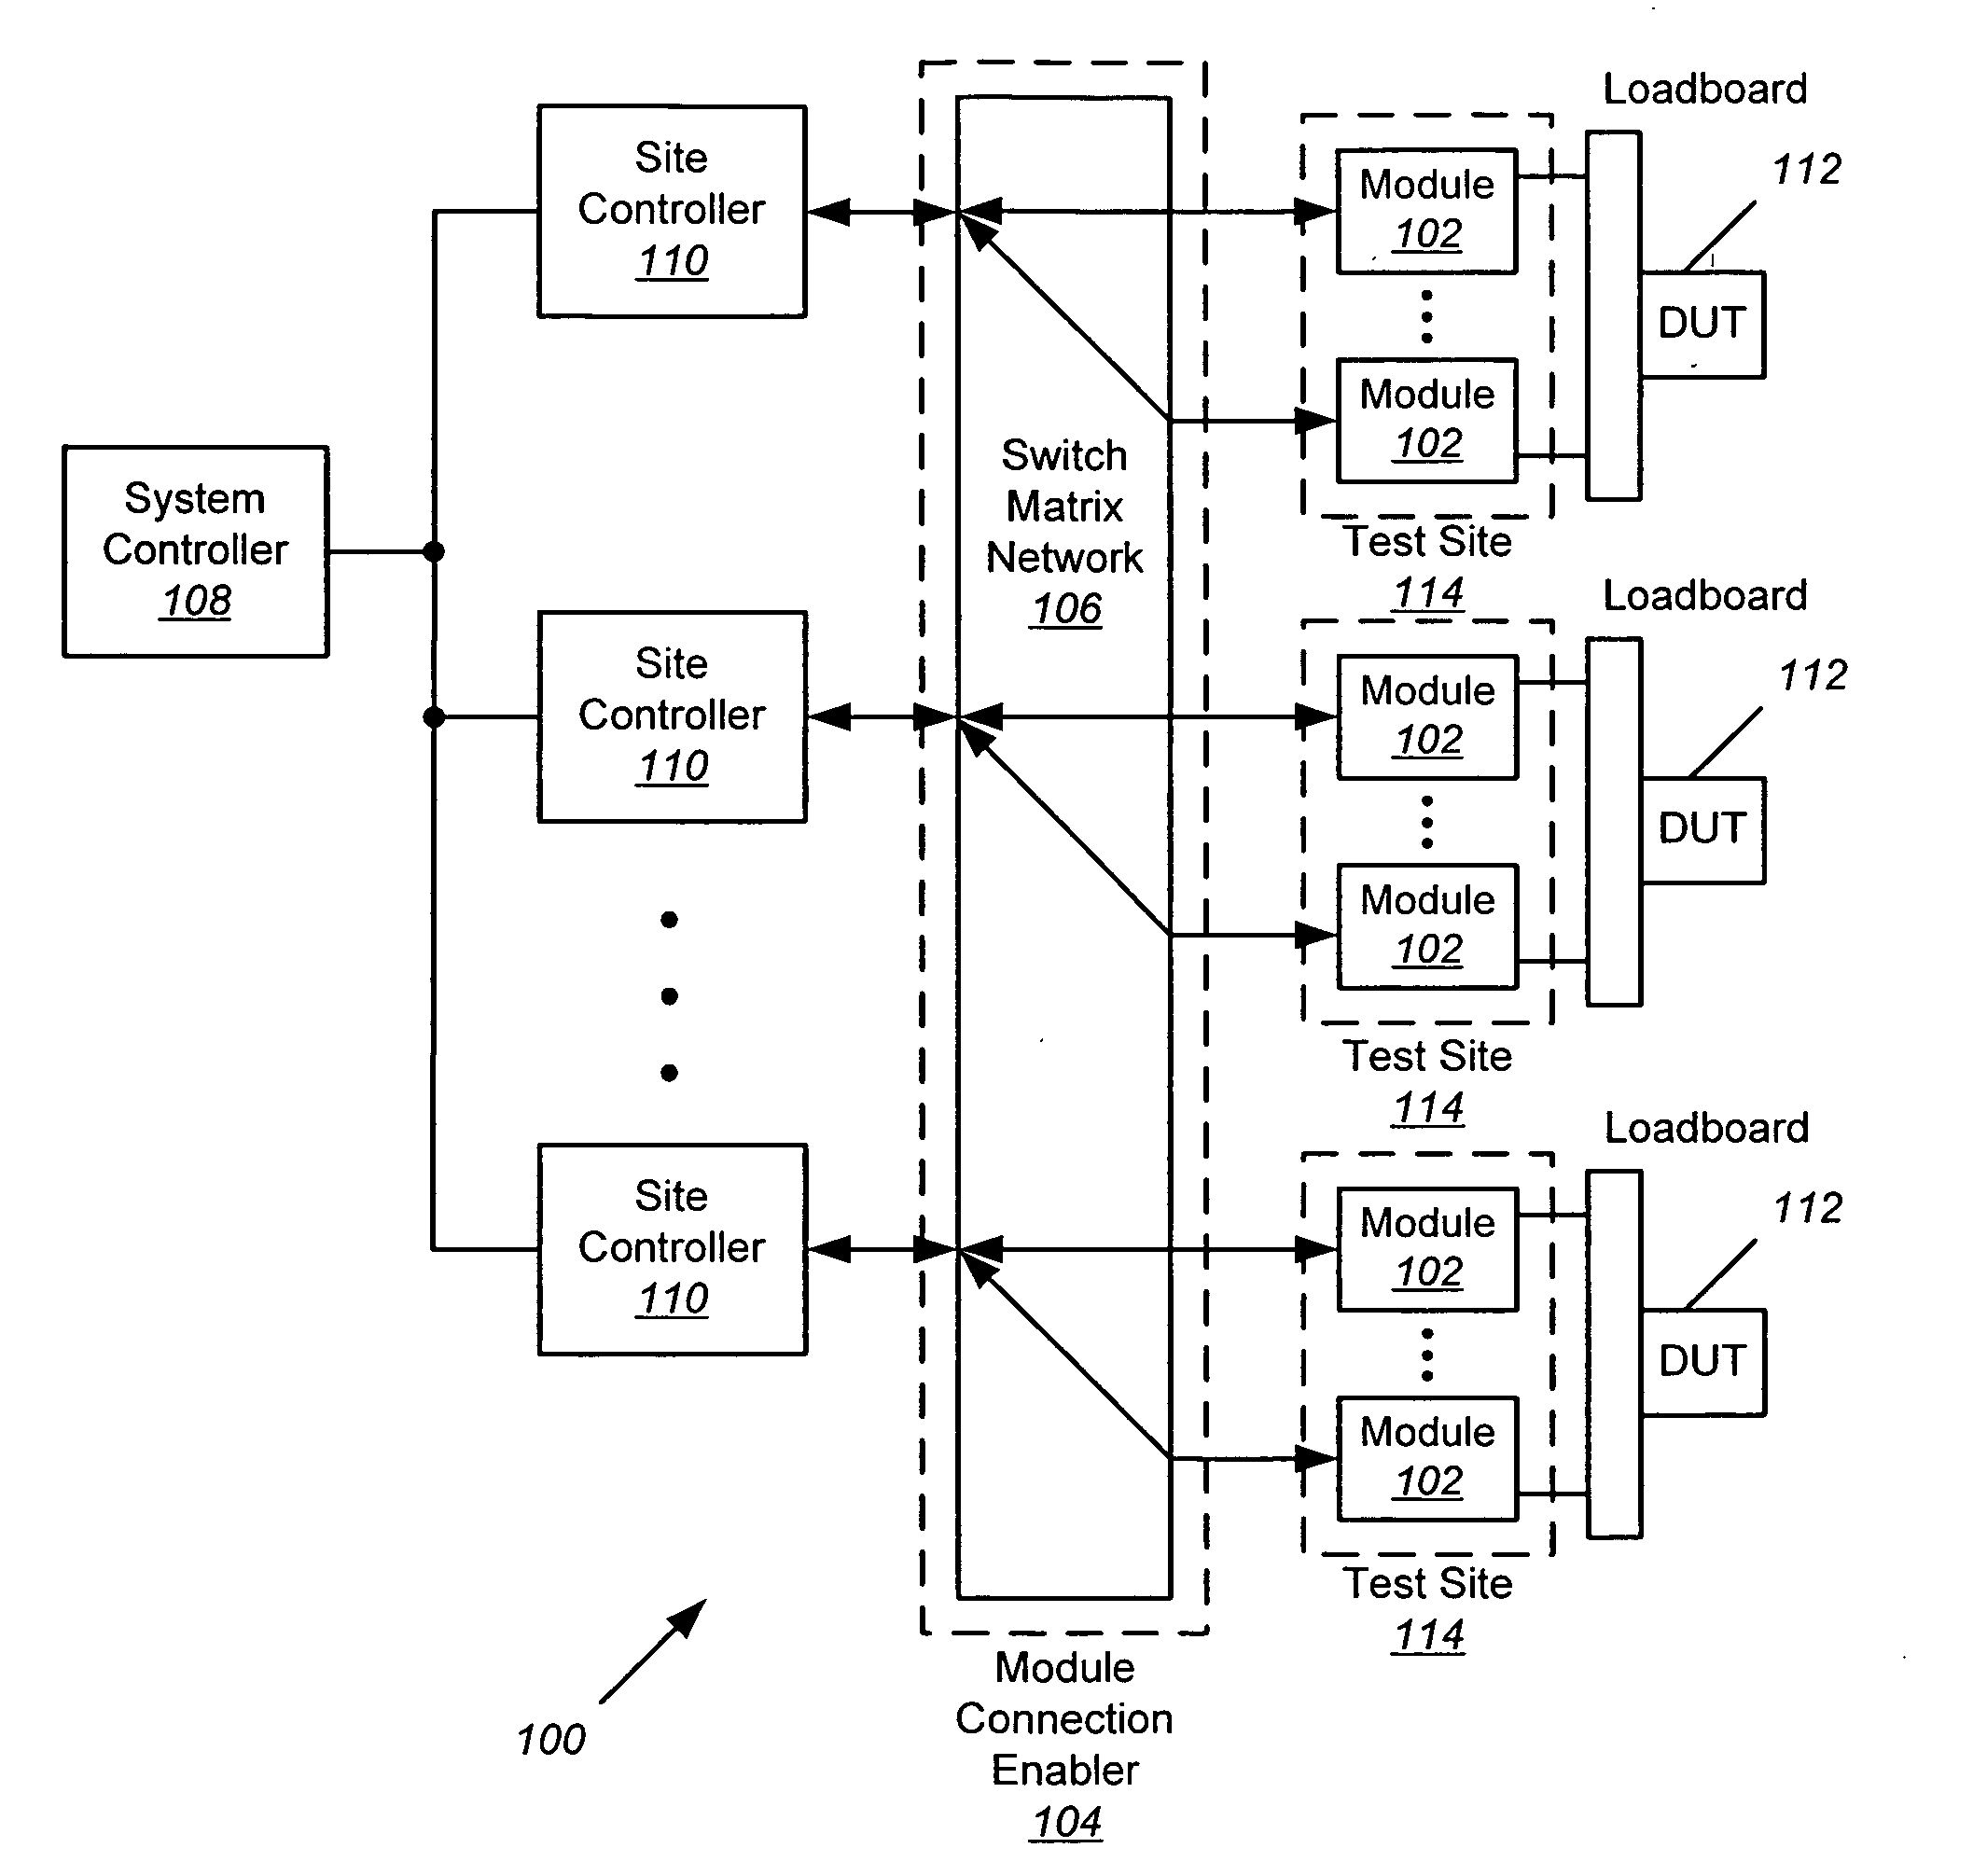 Synchronization of modules for analog and mixed signal testing in an open architecture test system